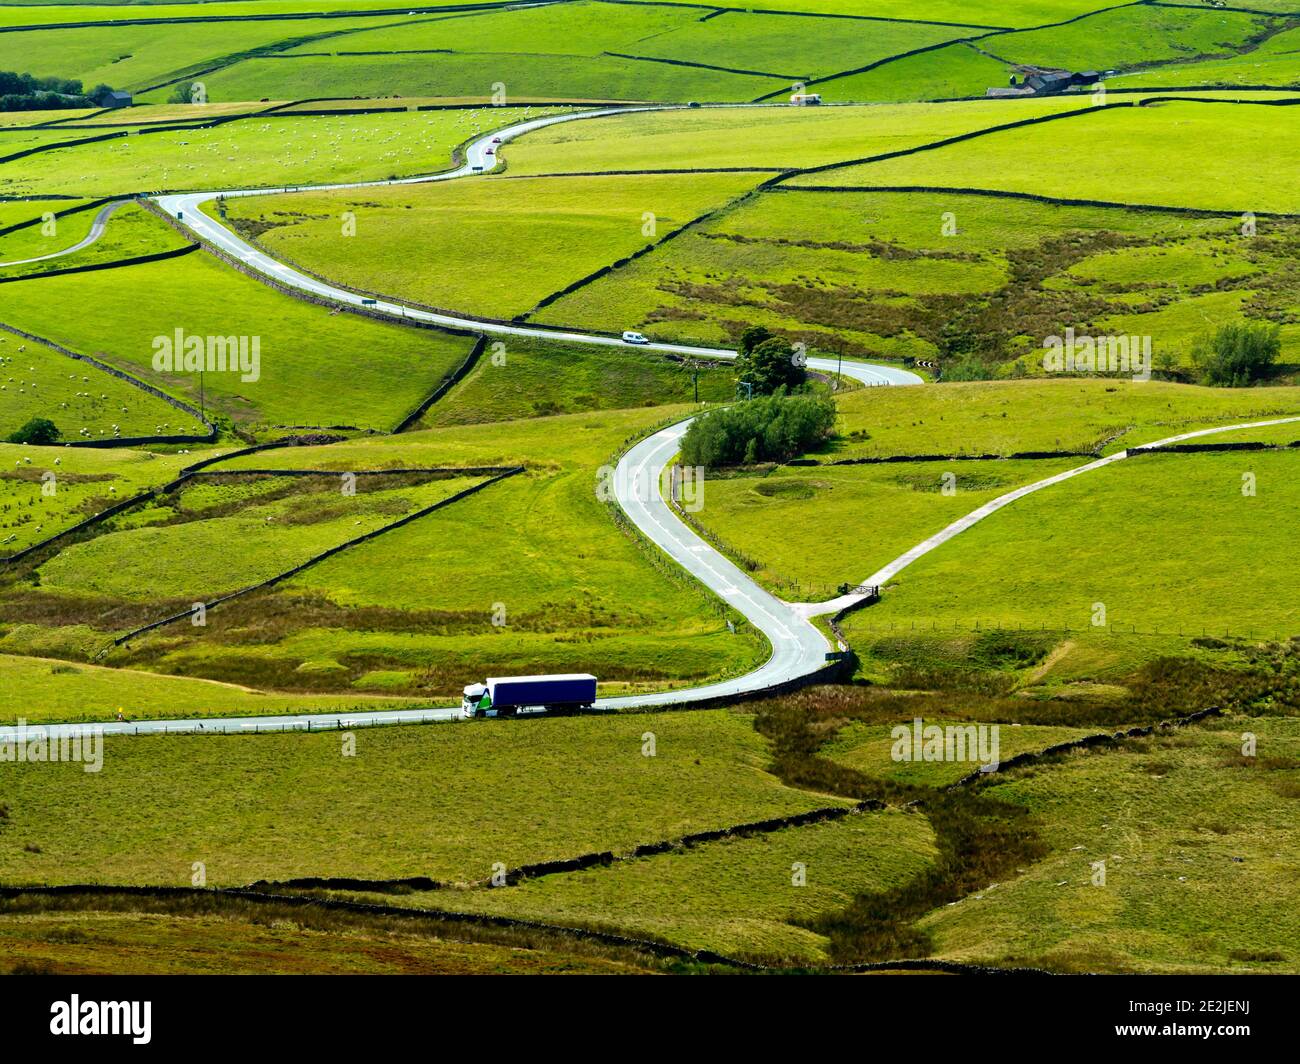 View looking down on the winding A537 road which runs between Buxton and Macclesfield on the Derbyshire and Cheshire border Peak District England UK Stock Photo